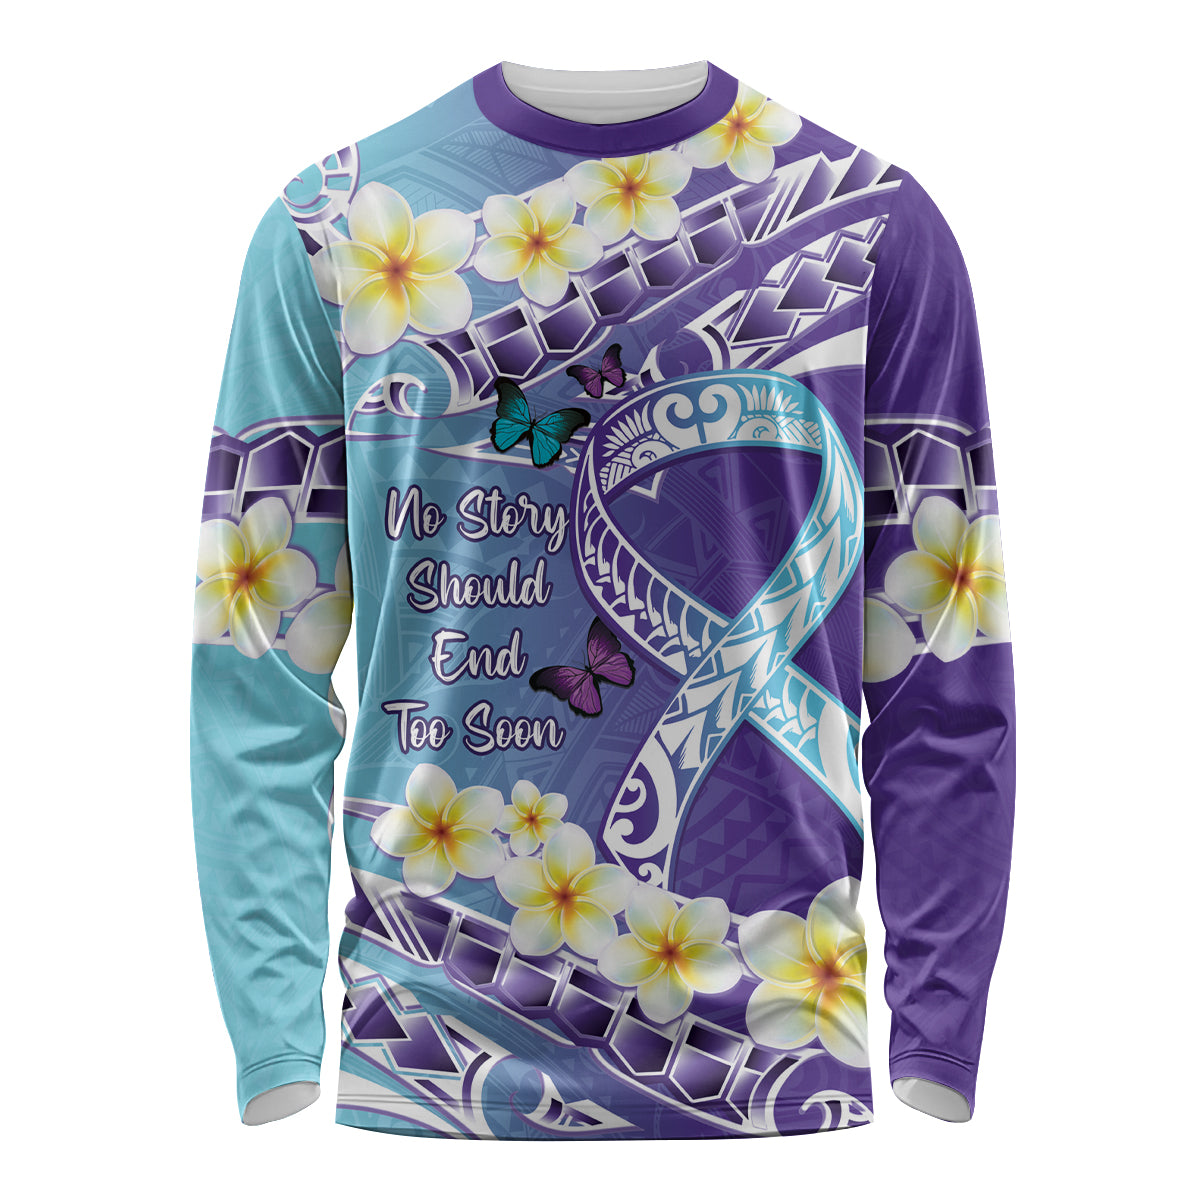 No Story Should End Too Soon Suicide Awareness Long Sleeve Shirt Purple And Teal Polynesian Ribbon